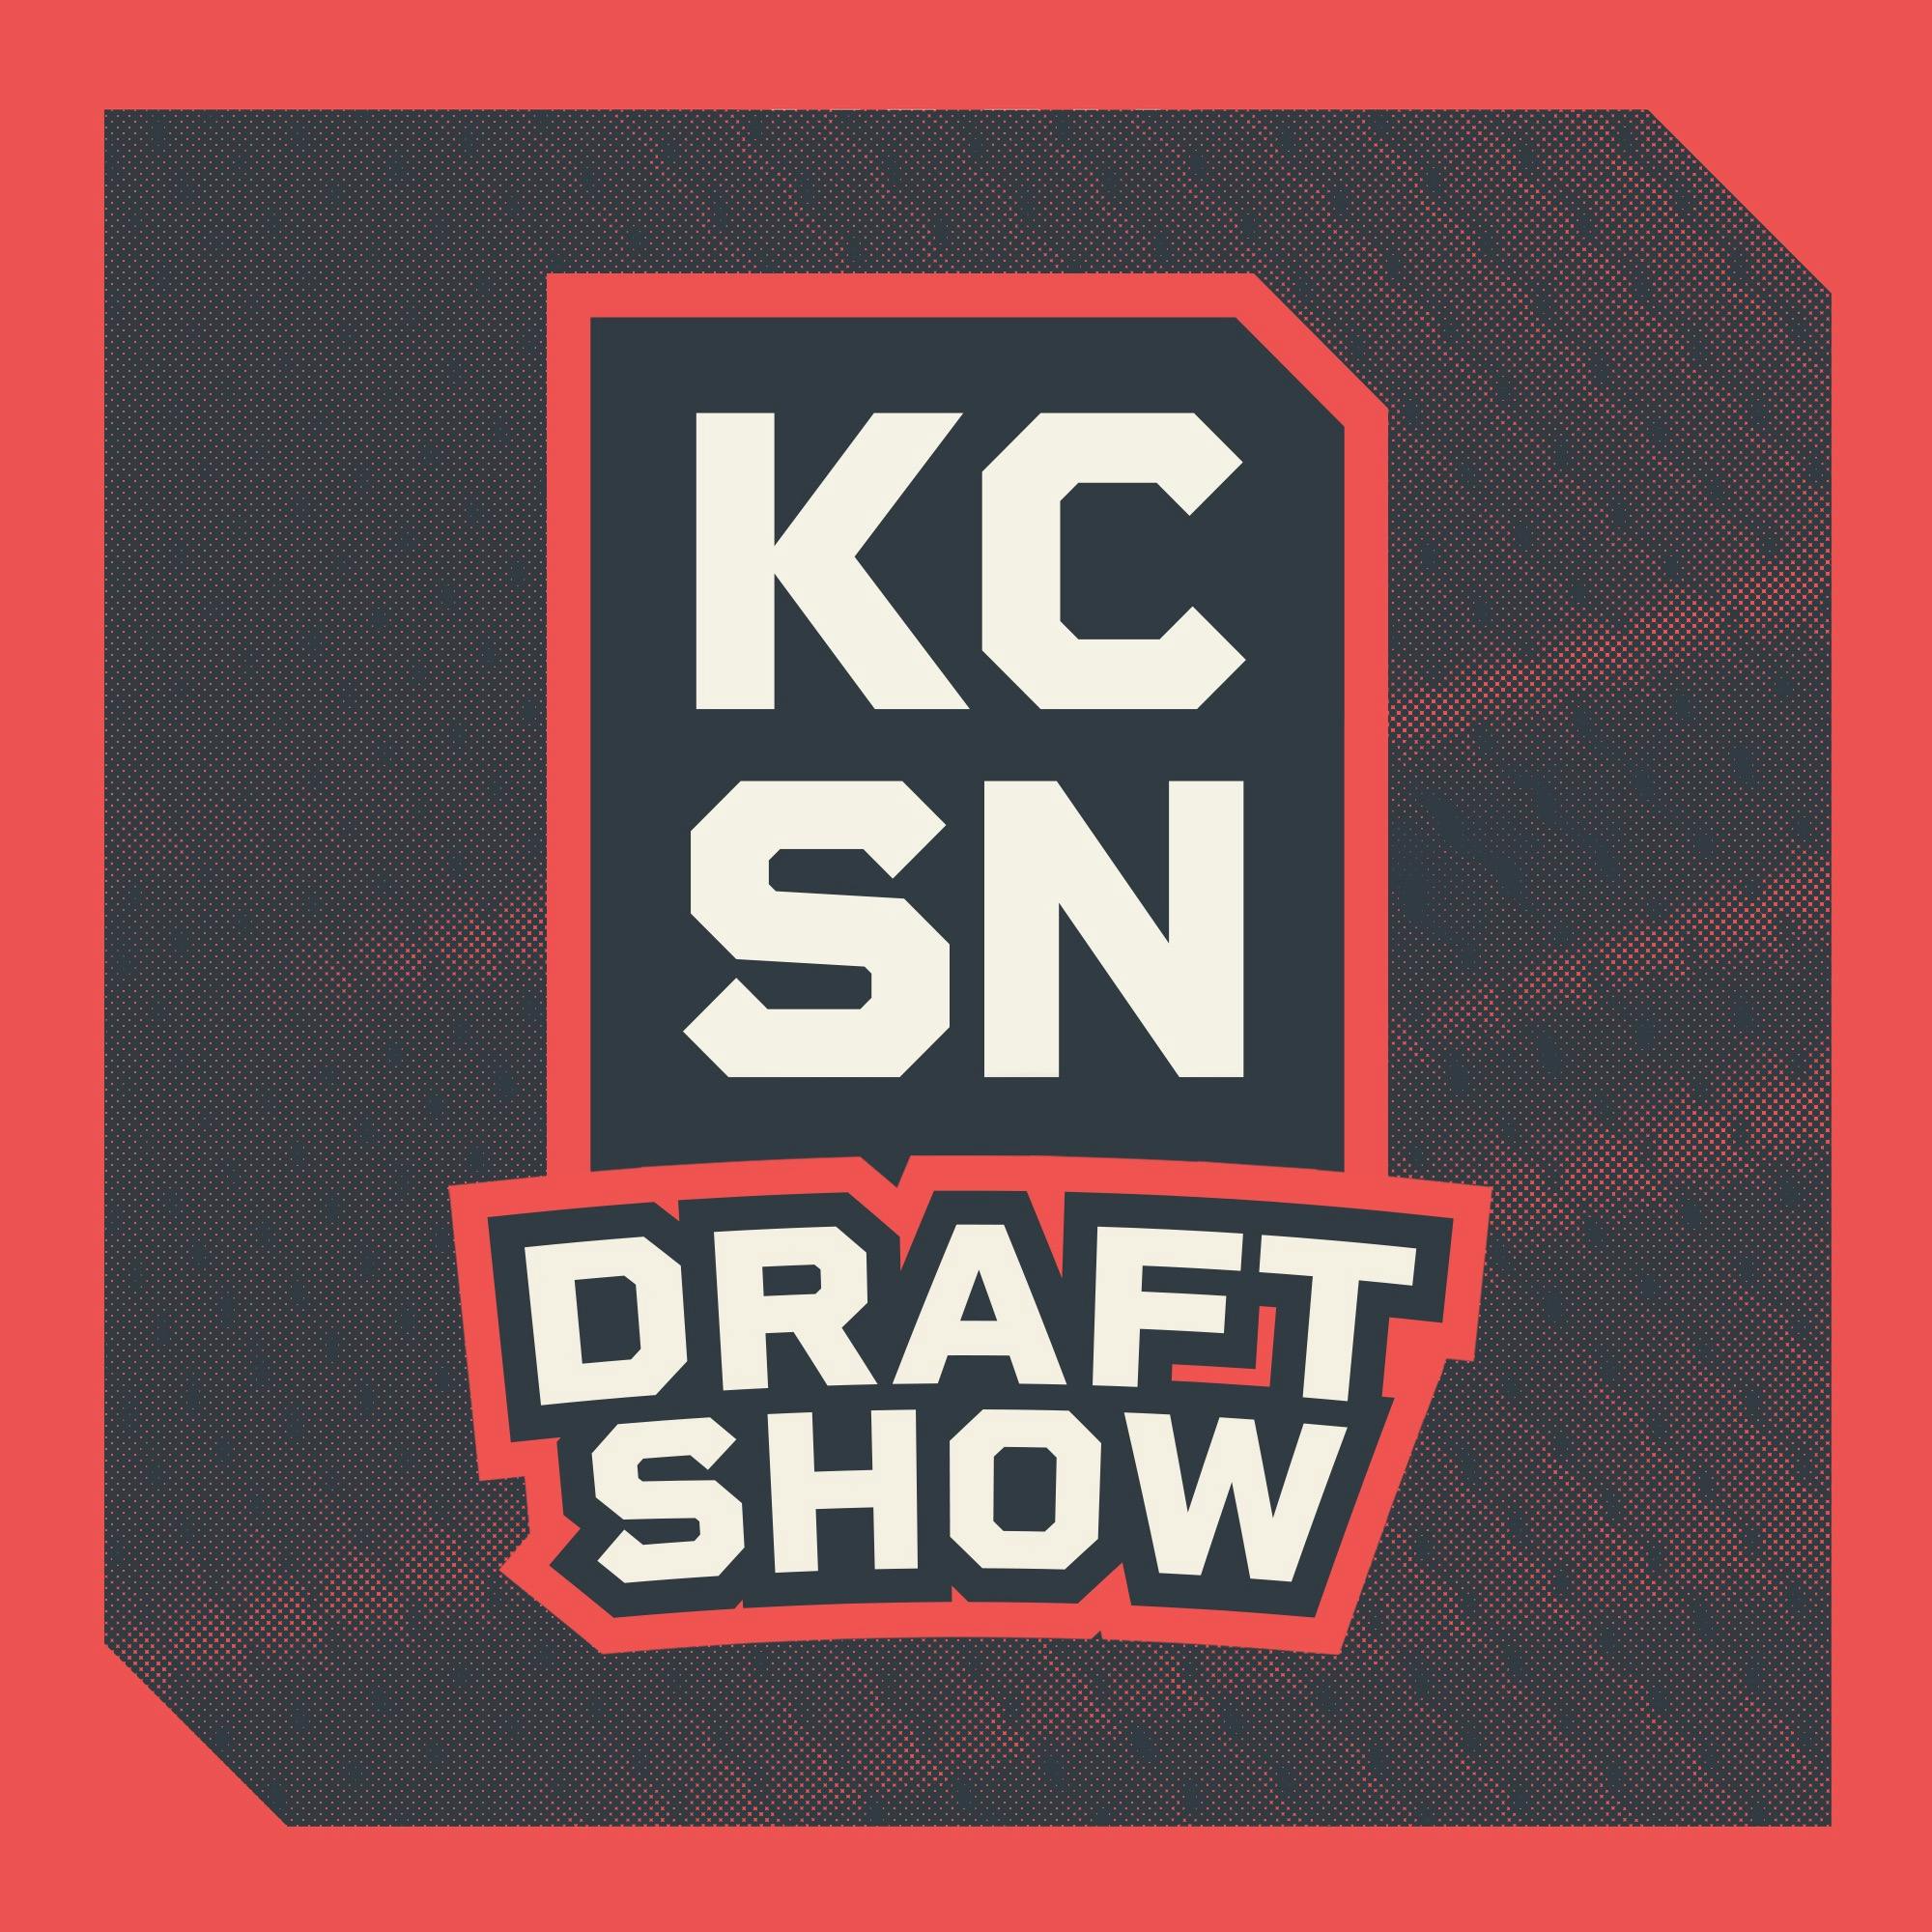 KCSN Draft Show 3/29: Previewing the 2023 NFL Draft - Defensive Tackles